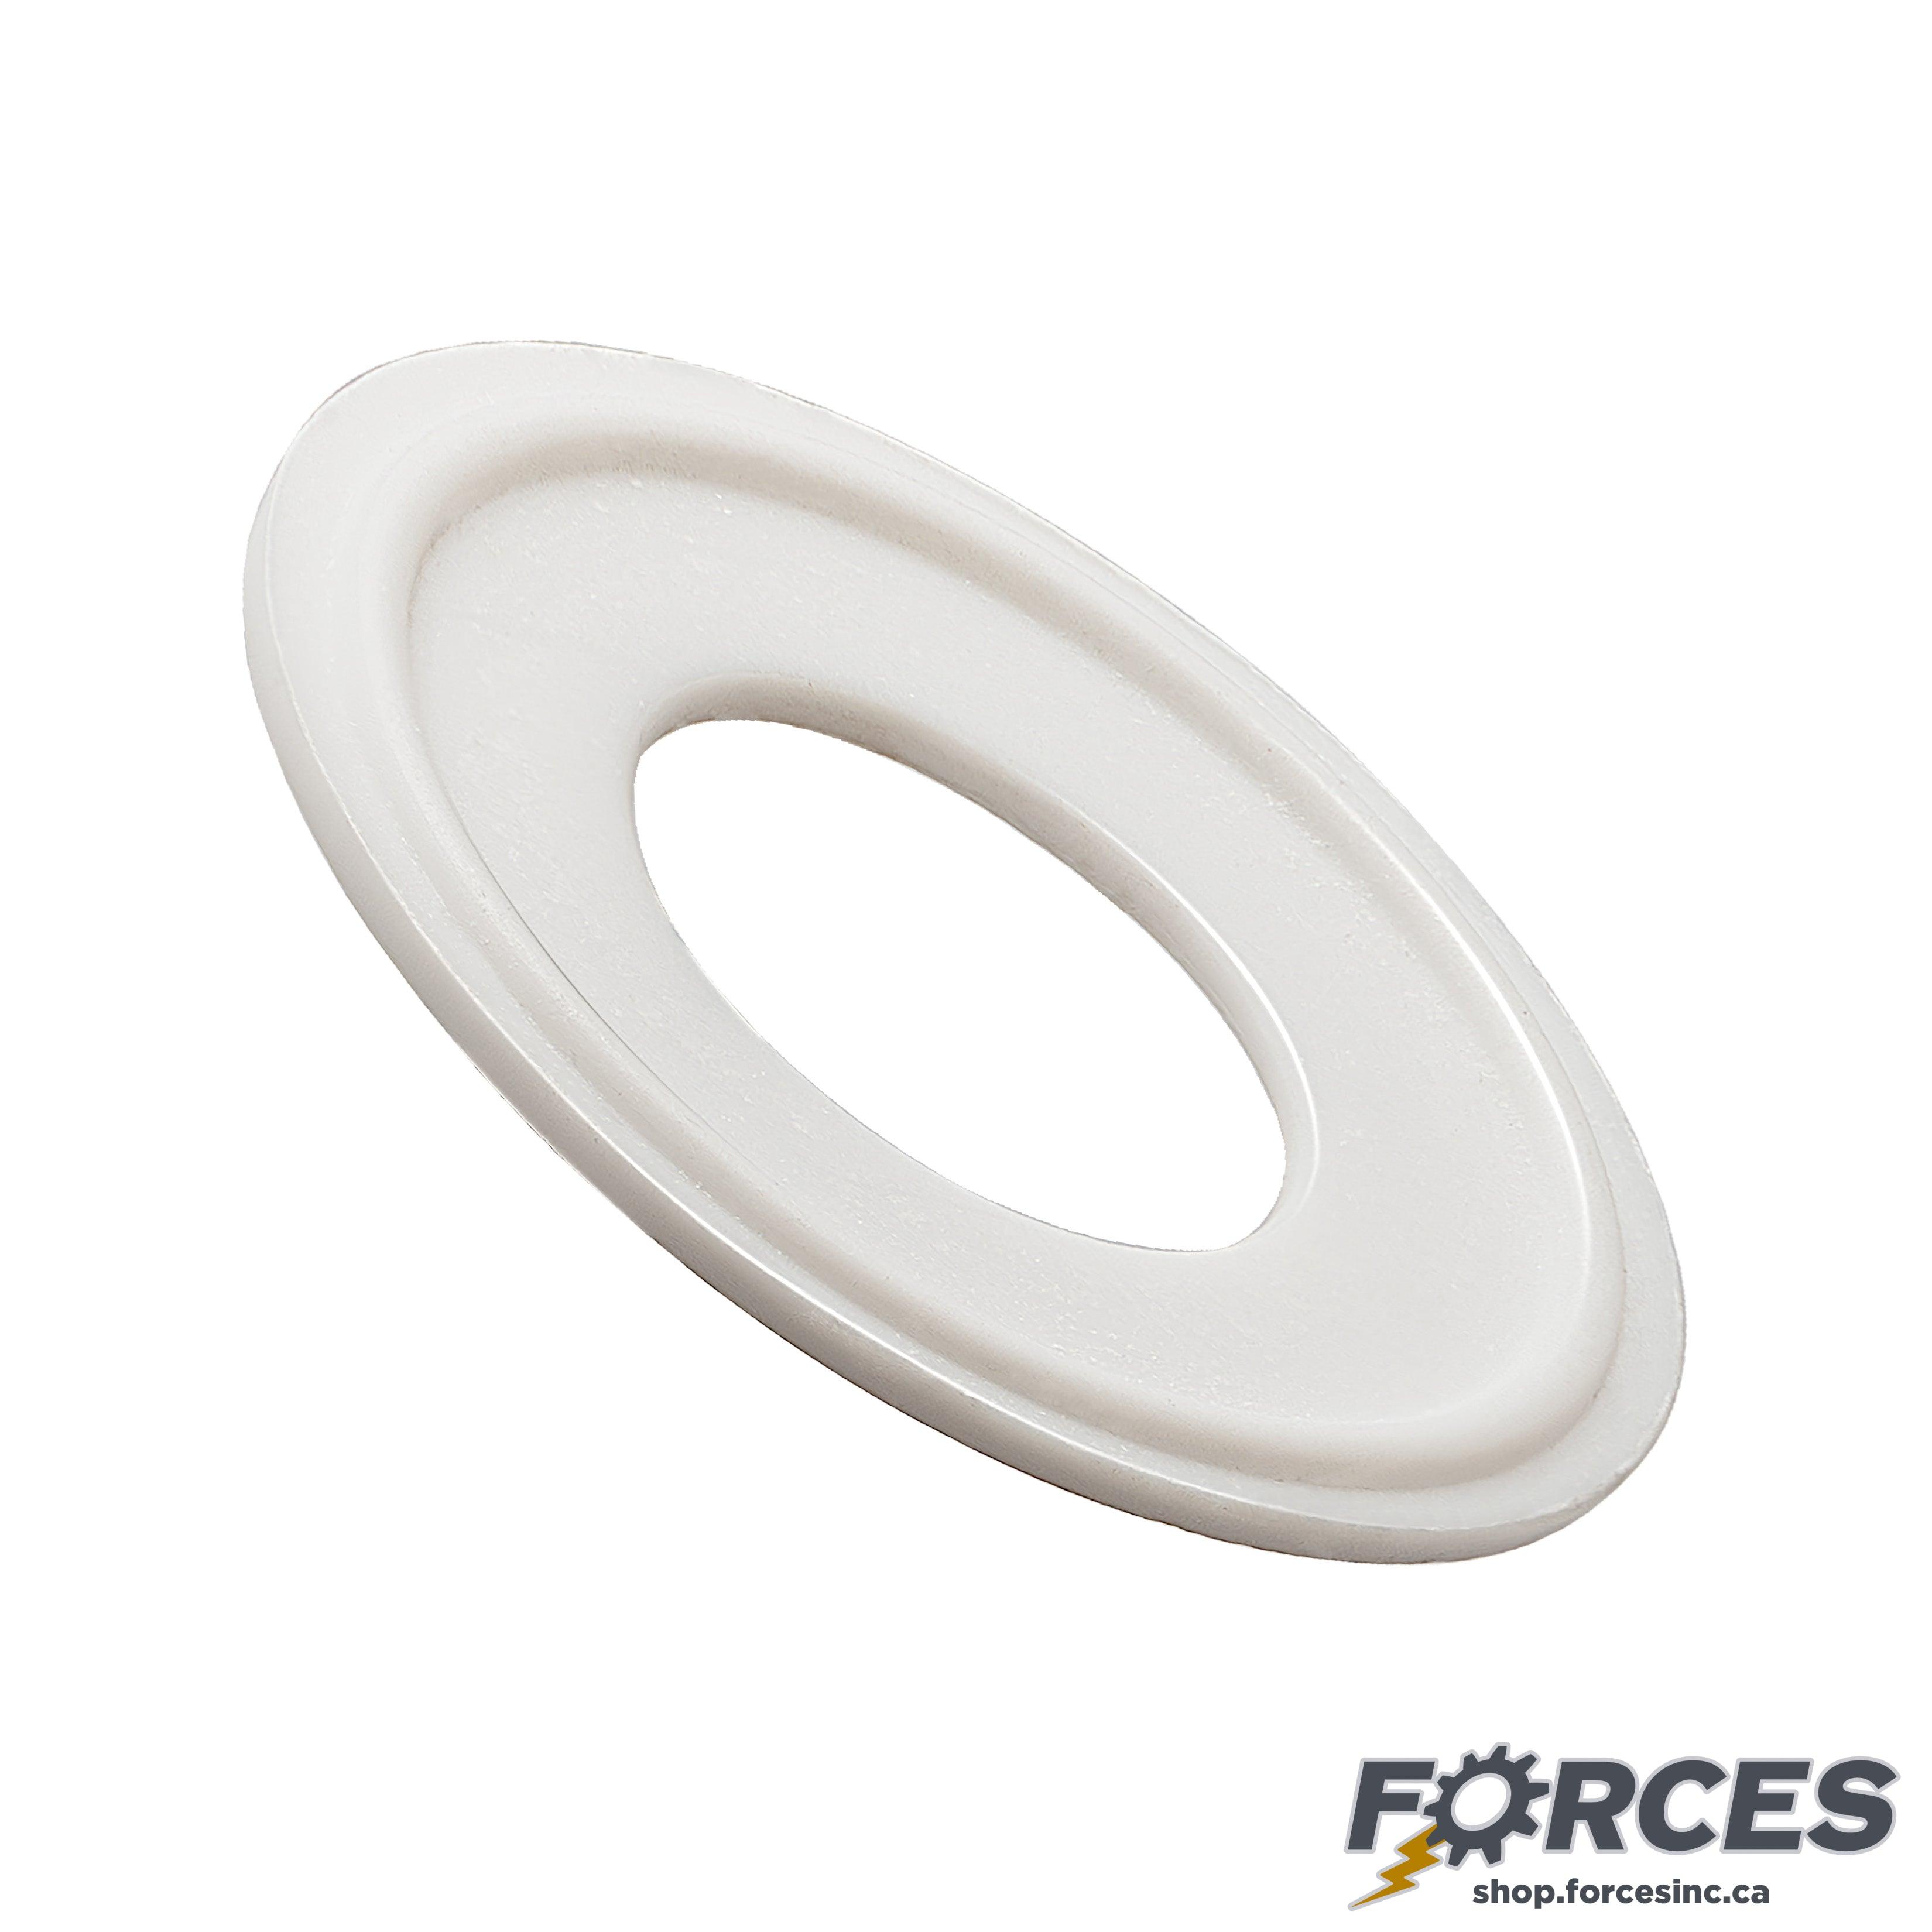 2" Sanitary Flanged Tri-Clamp Gasket - Silicone - Forces Inc